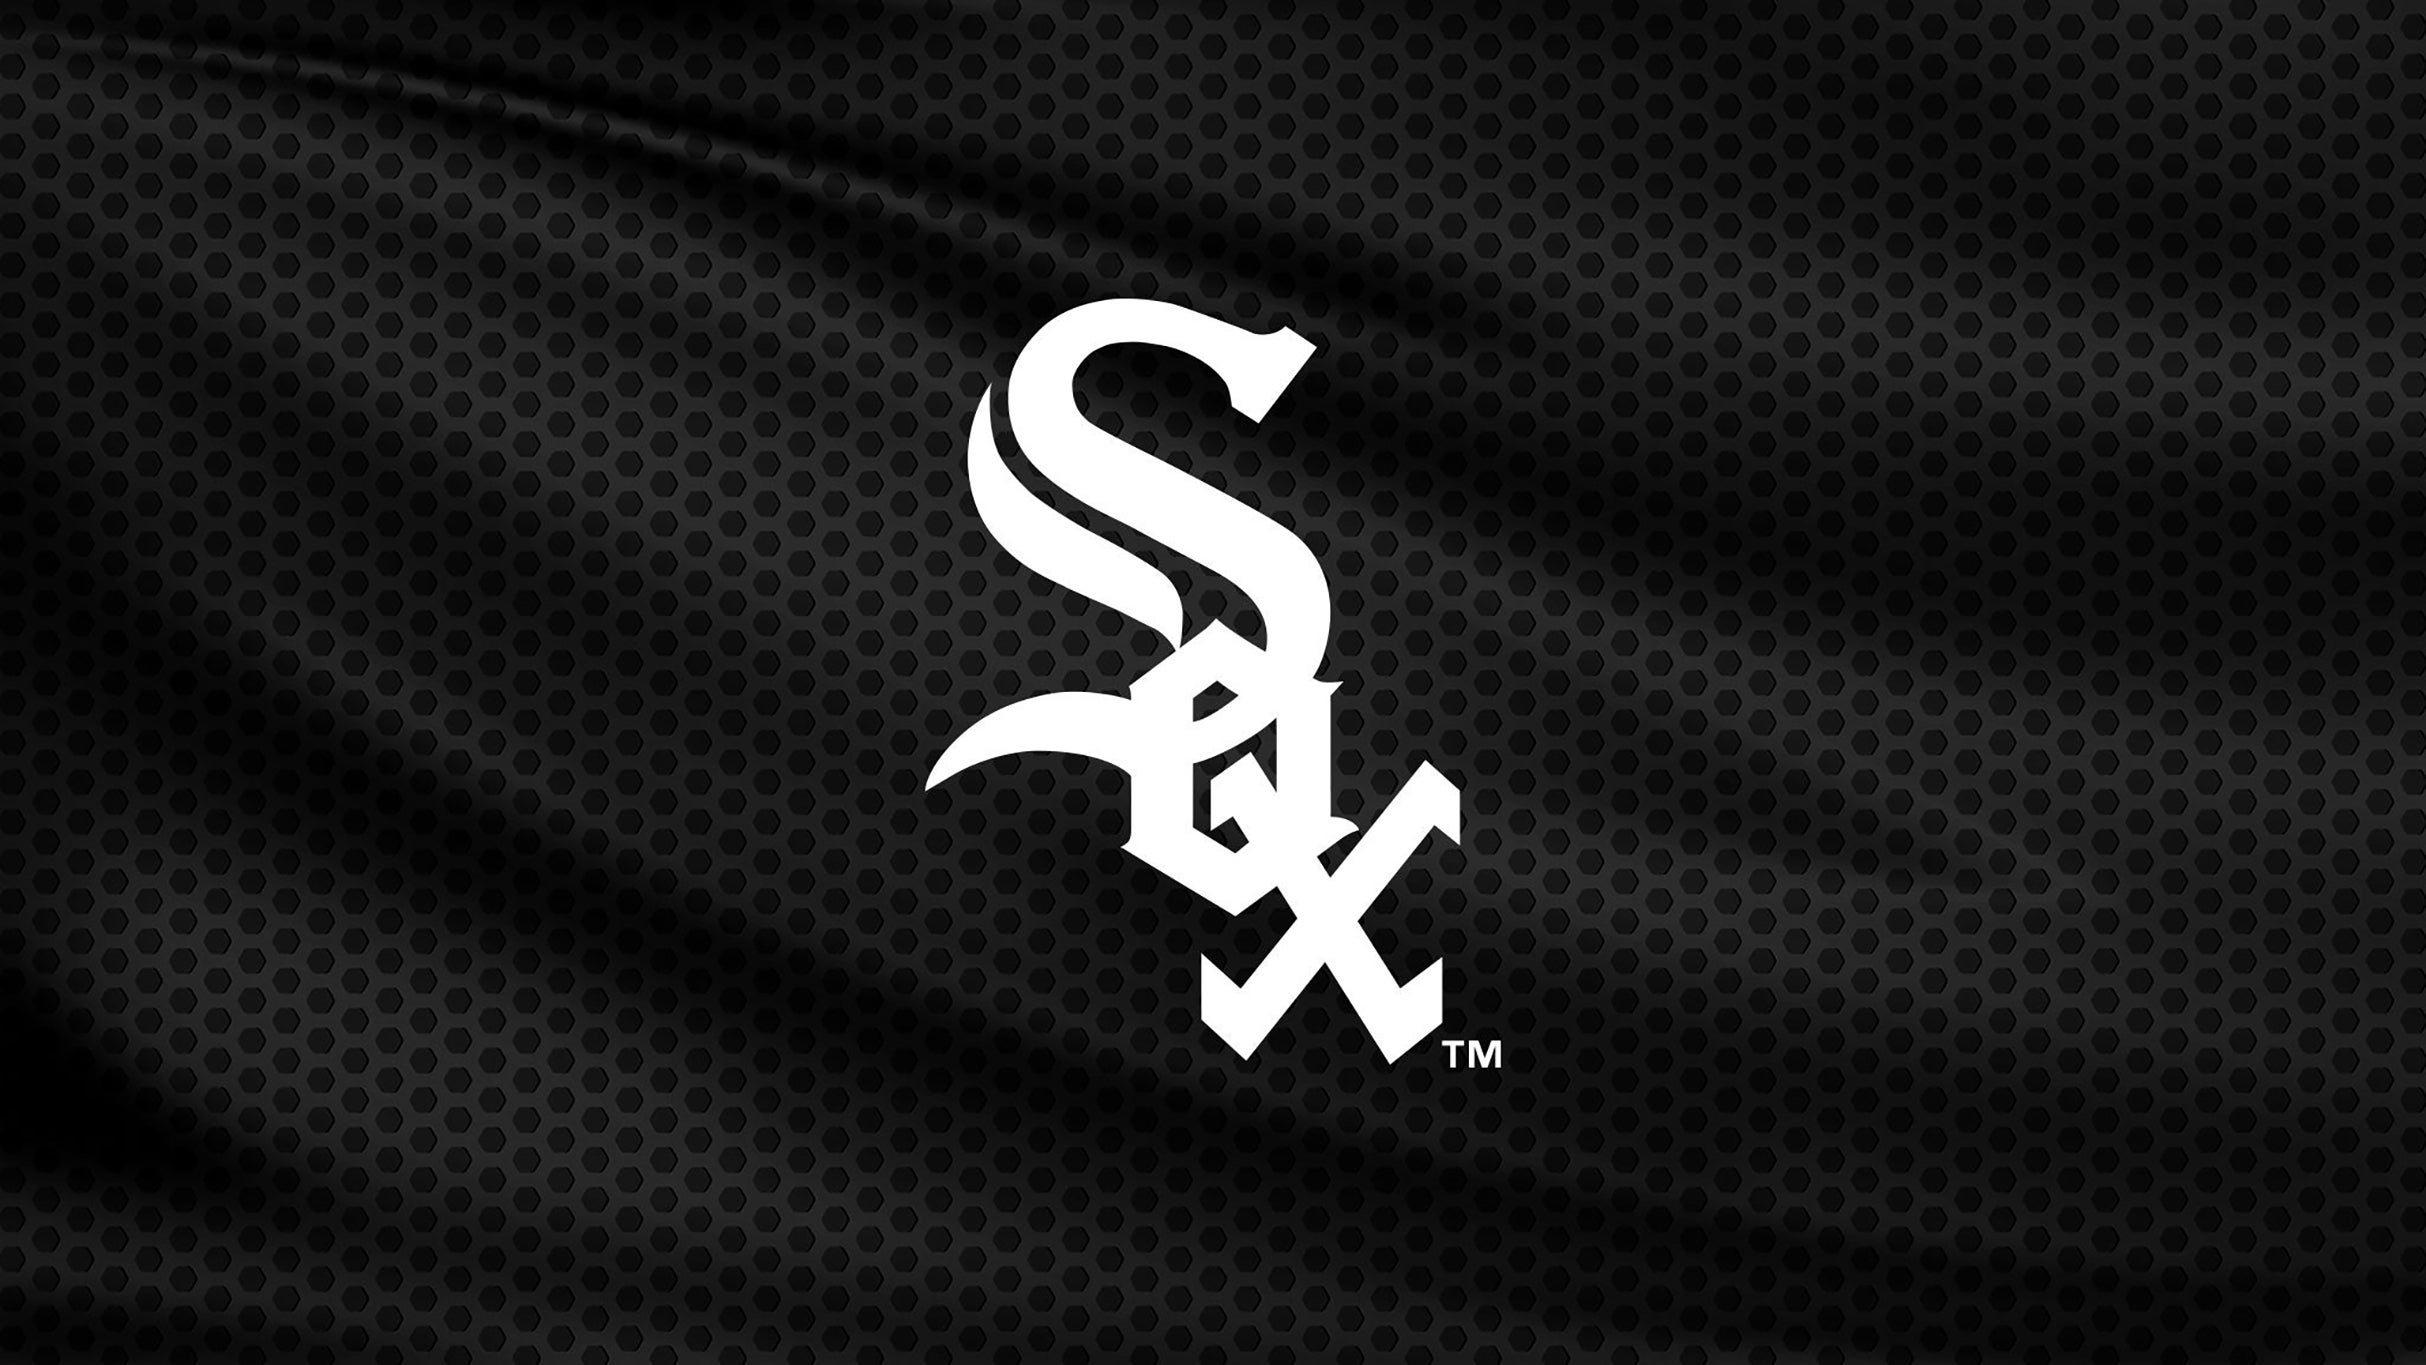 Chicago White Sox vs. Cleveland Guardians presales in Chicago